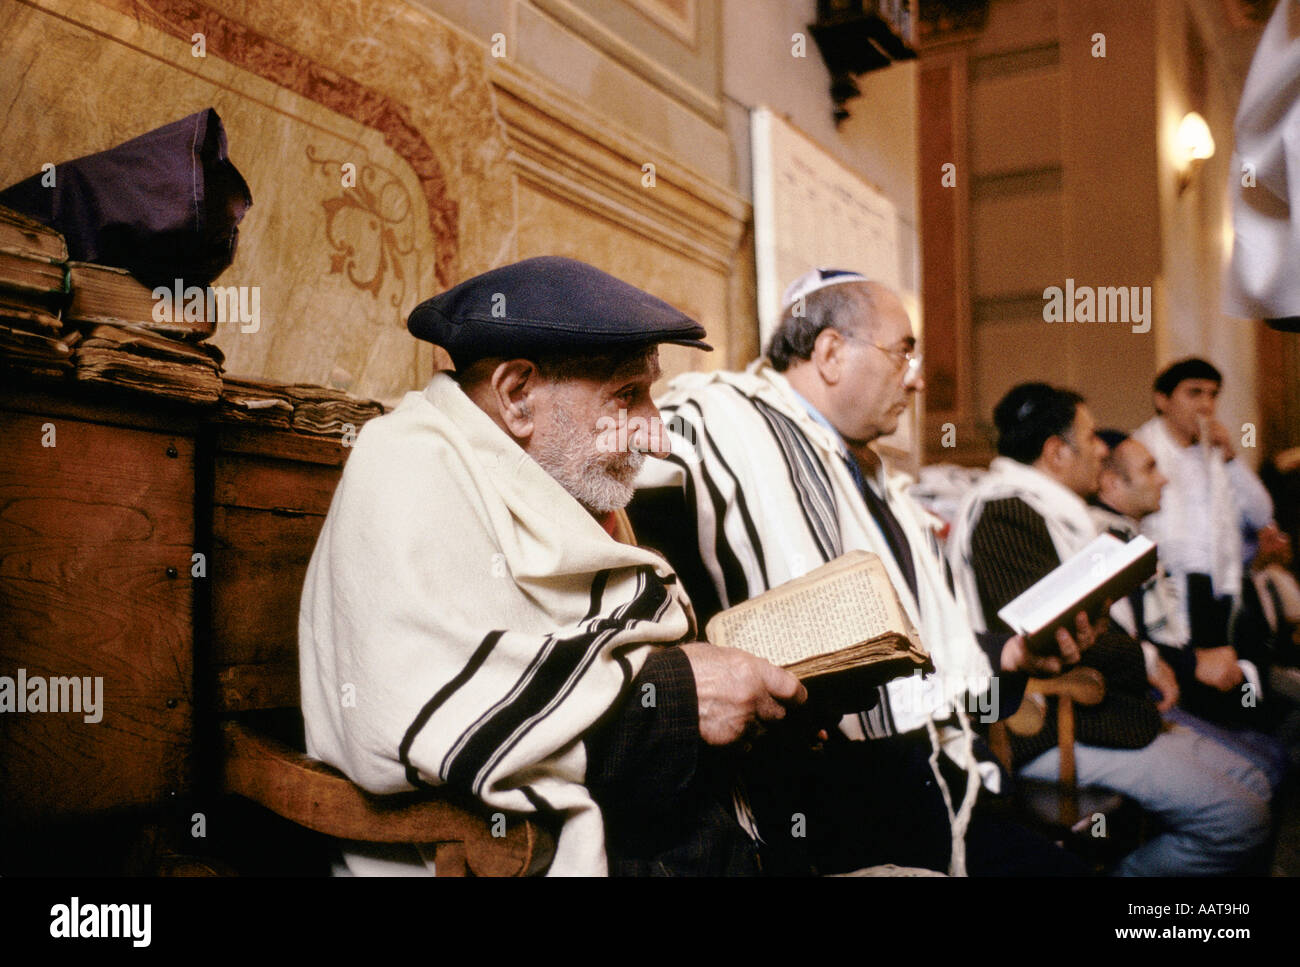 Jewish men worshipping in a synagogue Stock Photo